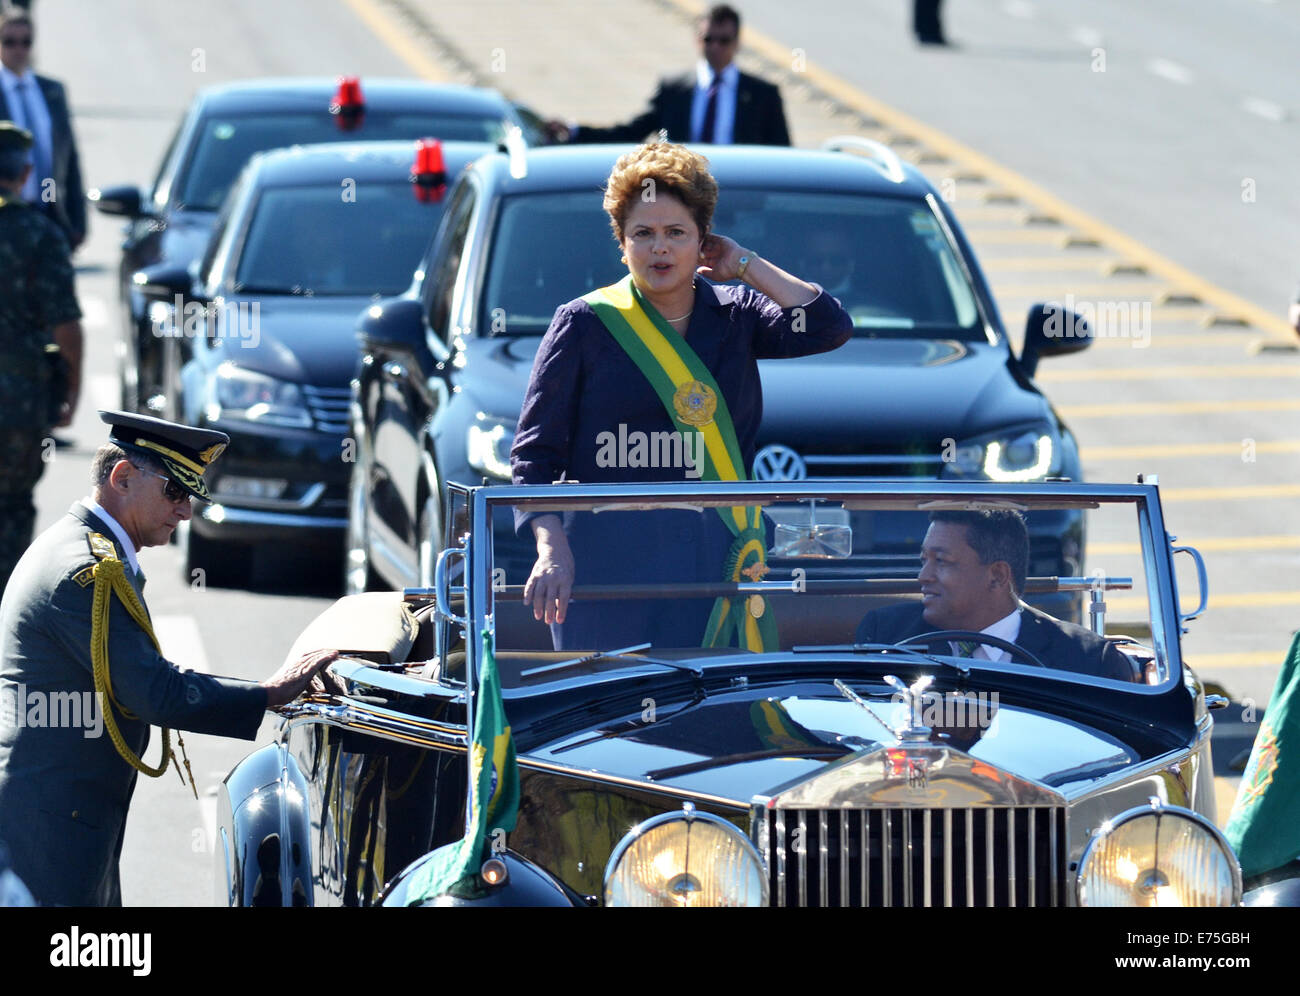 Brasilia, Brazil. 7th Sep, 2014. Brazilian President Dilma Rousseff (C), takes part in a military parade to commemorate the Independence's Day of Brazil, in Brasilia, Brazil, on Sept. 7, 2014. Brazil celebrates the 192th anniversary of its independence on Sunday. Credit:  Renato Costa/Fram/Estadao Conteudo/AGENCIA ESTADO/Xinhua/Alamy Live News Stock Photo